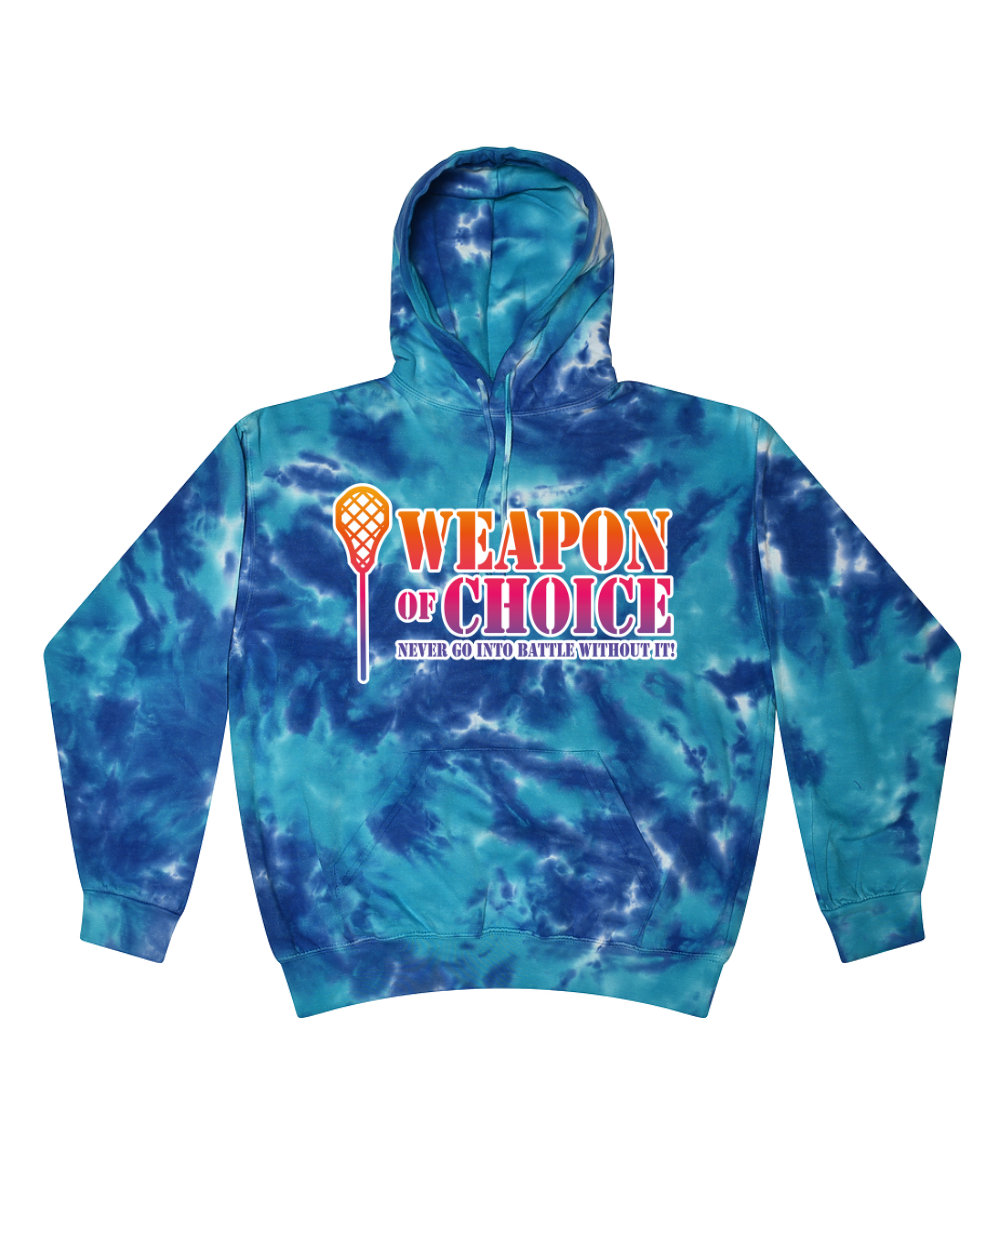 Weapon Of Choice Never Go Into Battle Without It! - Tie Dye Hoodies